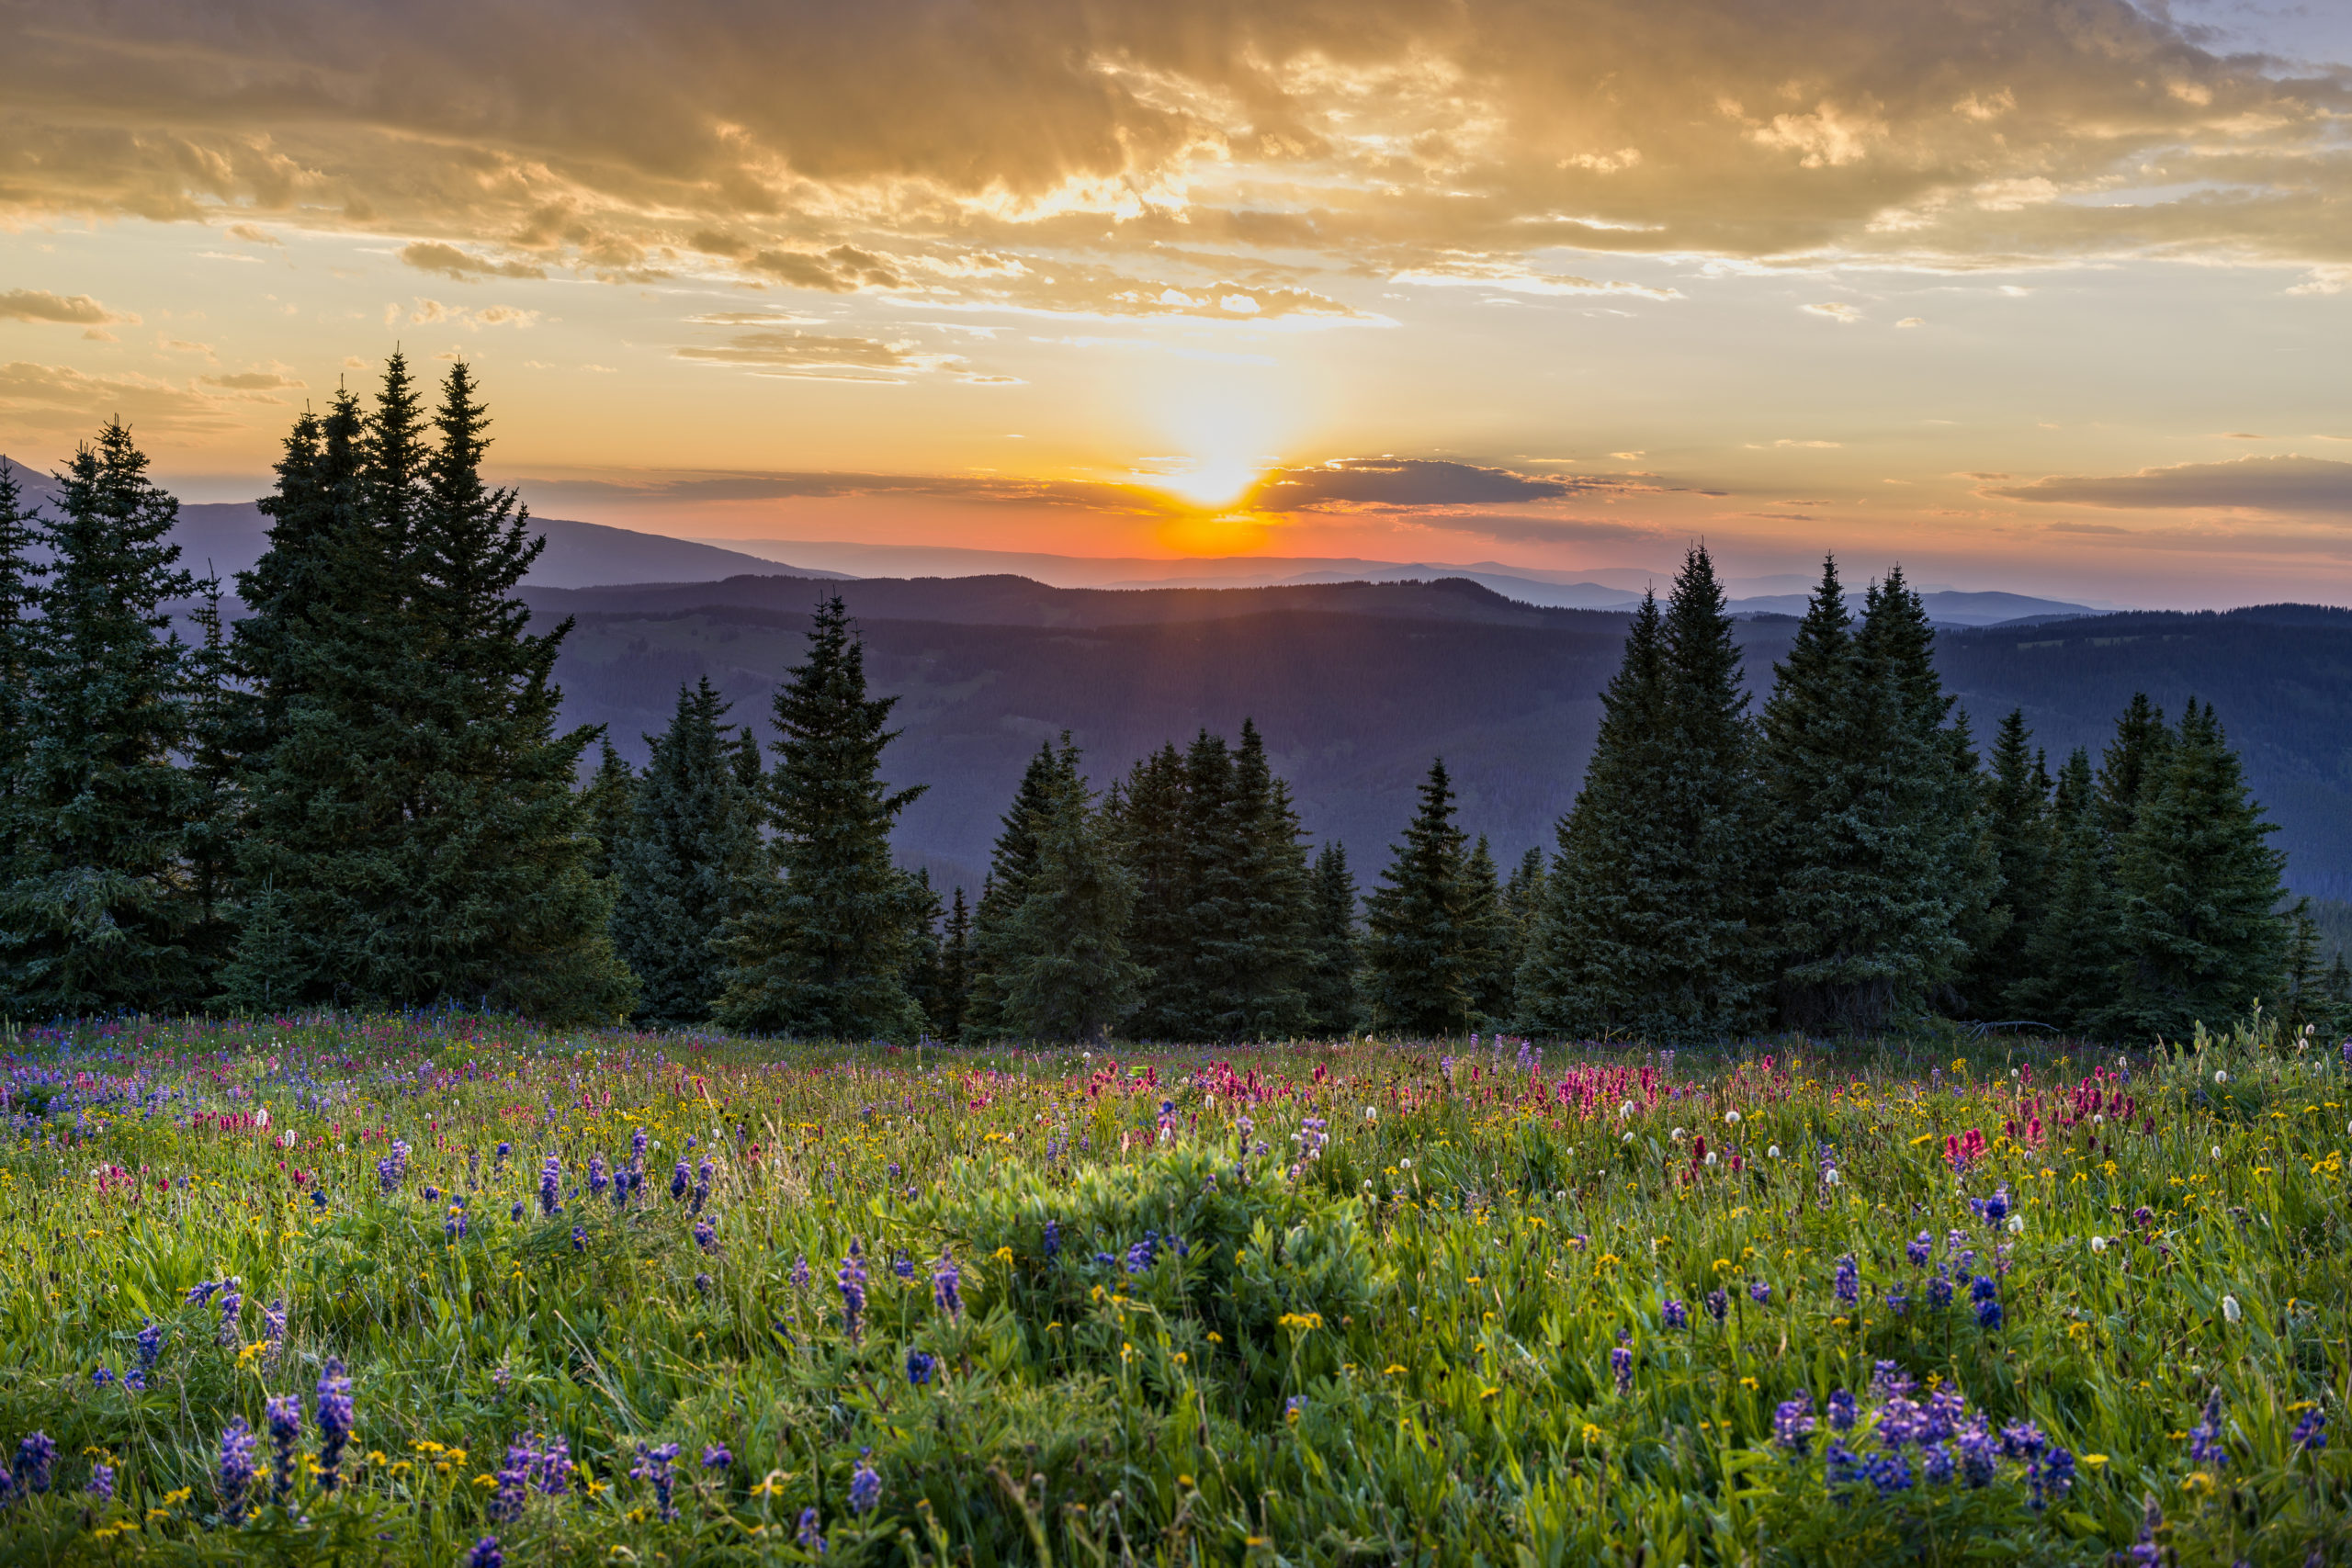 Wildflowers in Mountain Meadow at Sunset